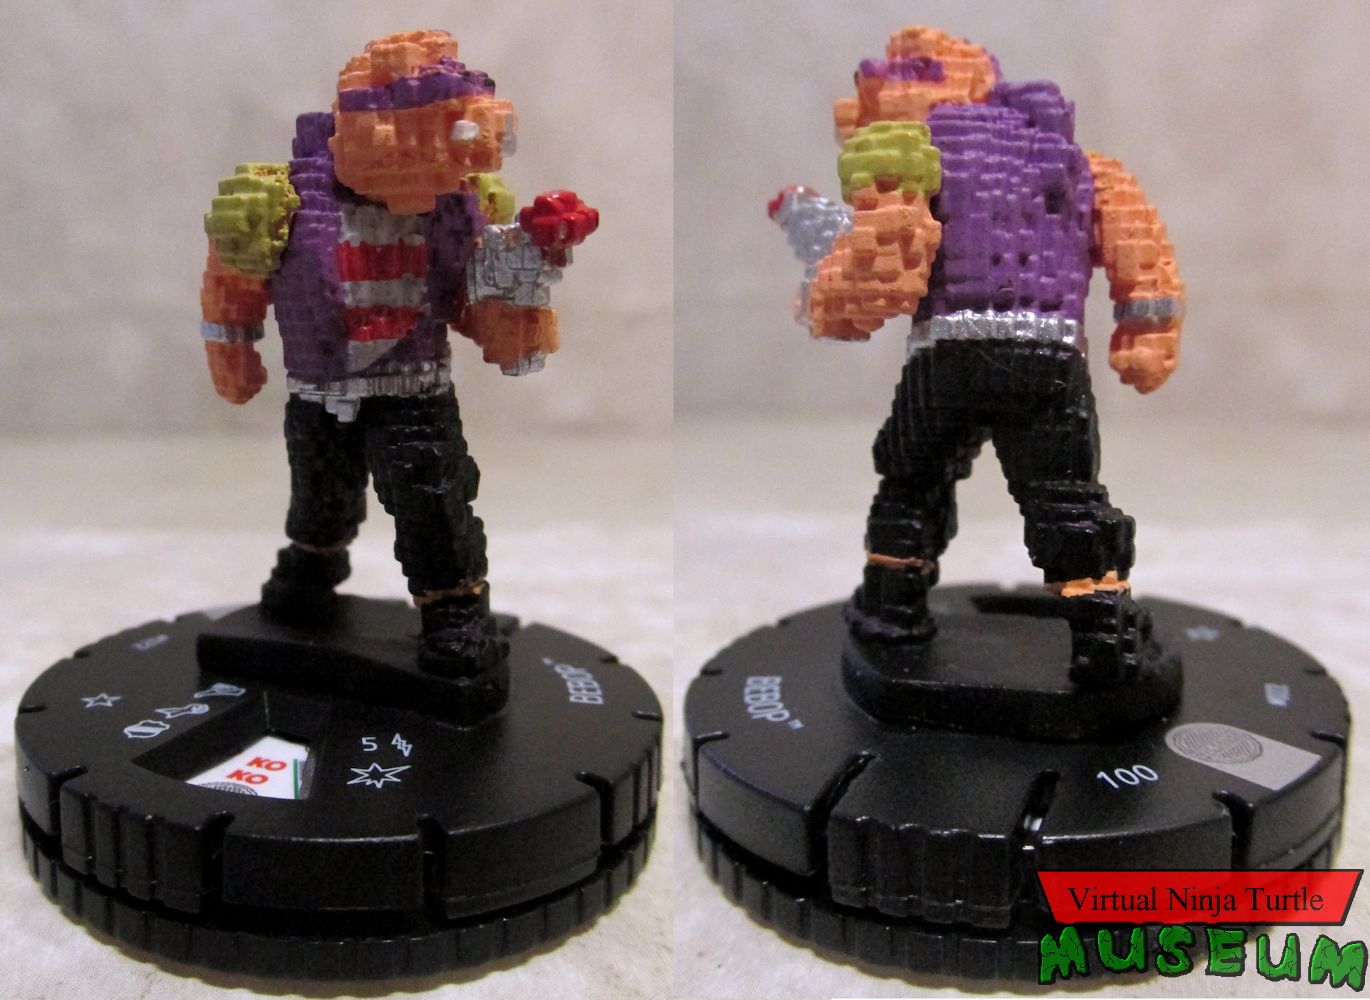 022 Bebop (video game) front and back